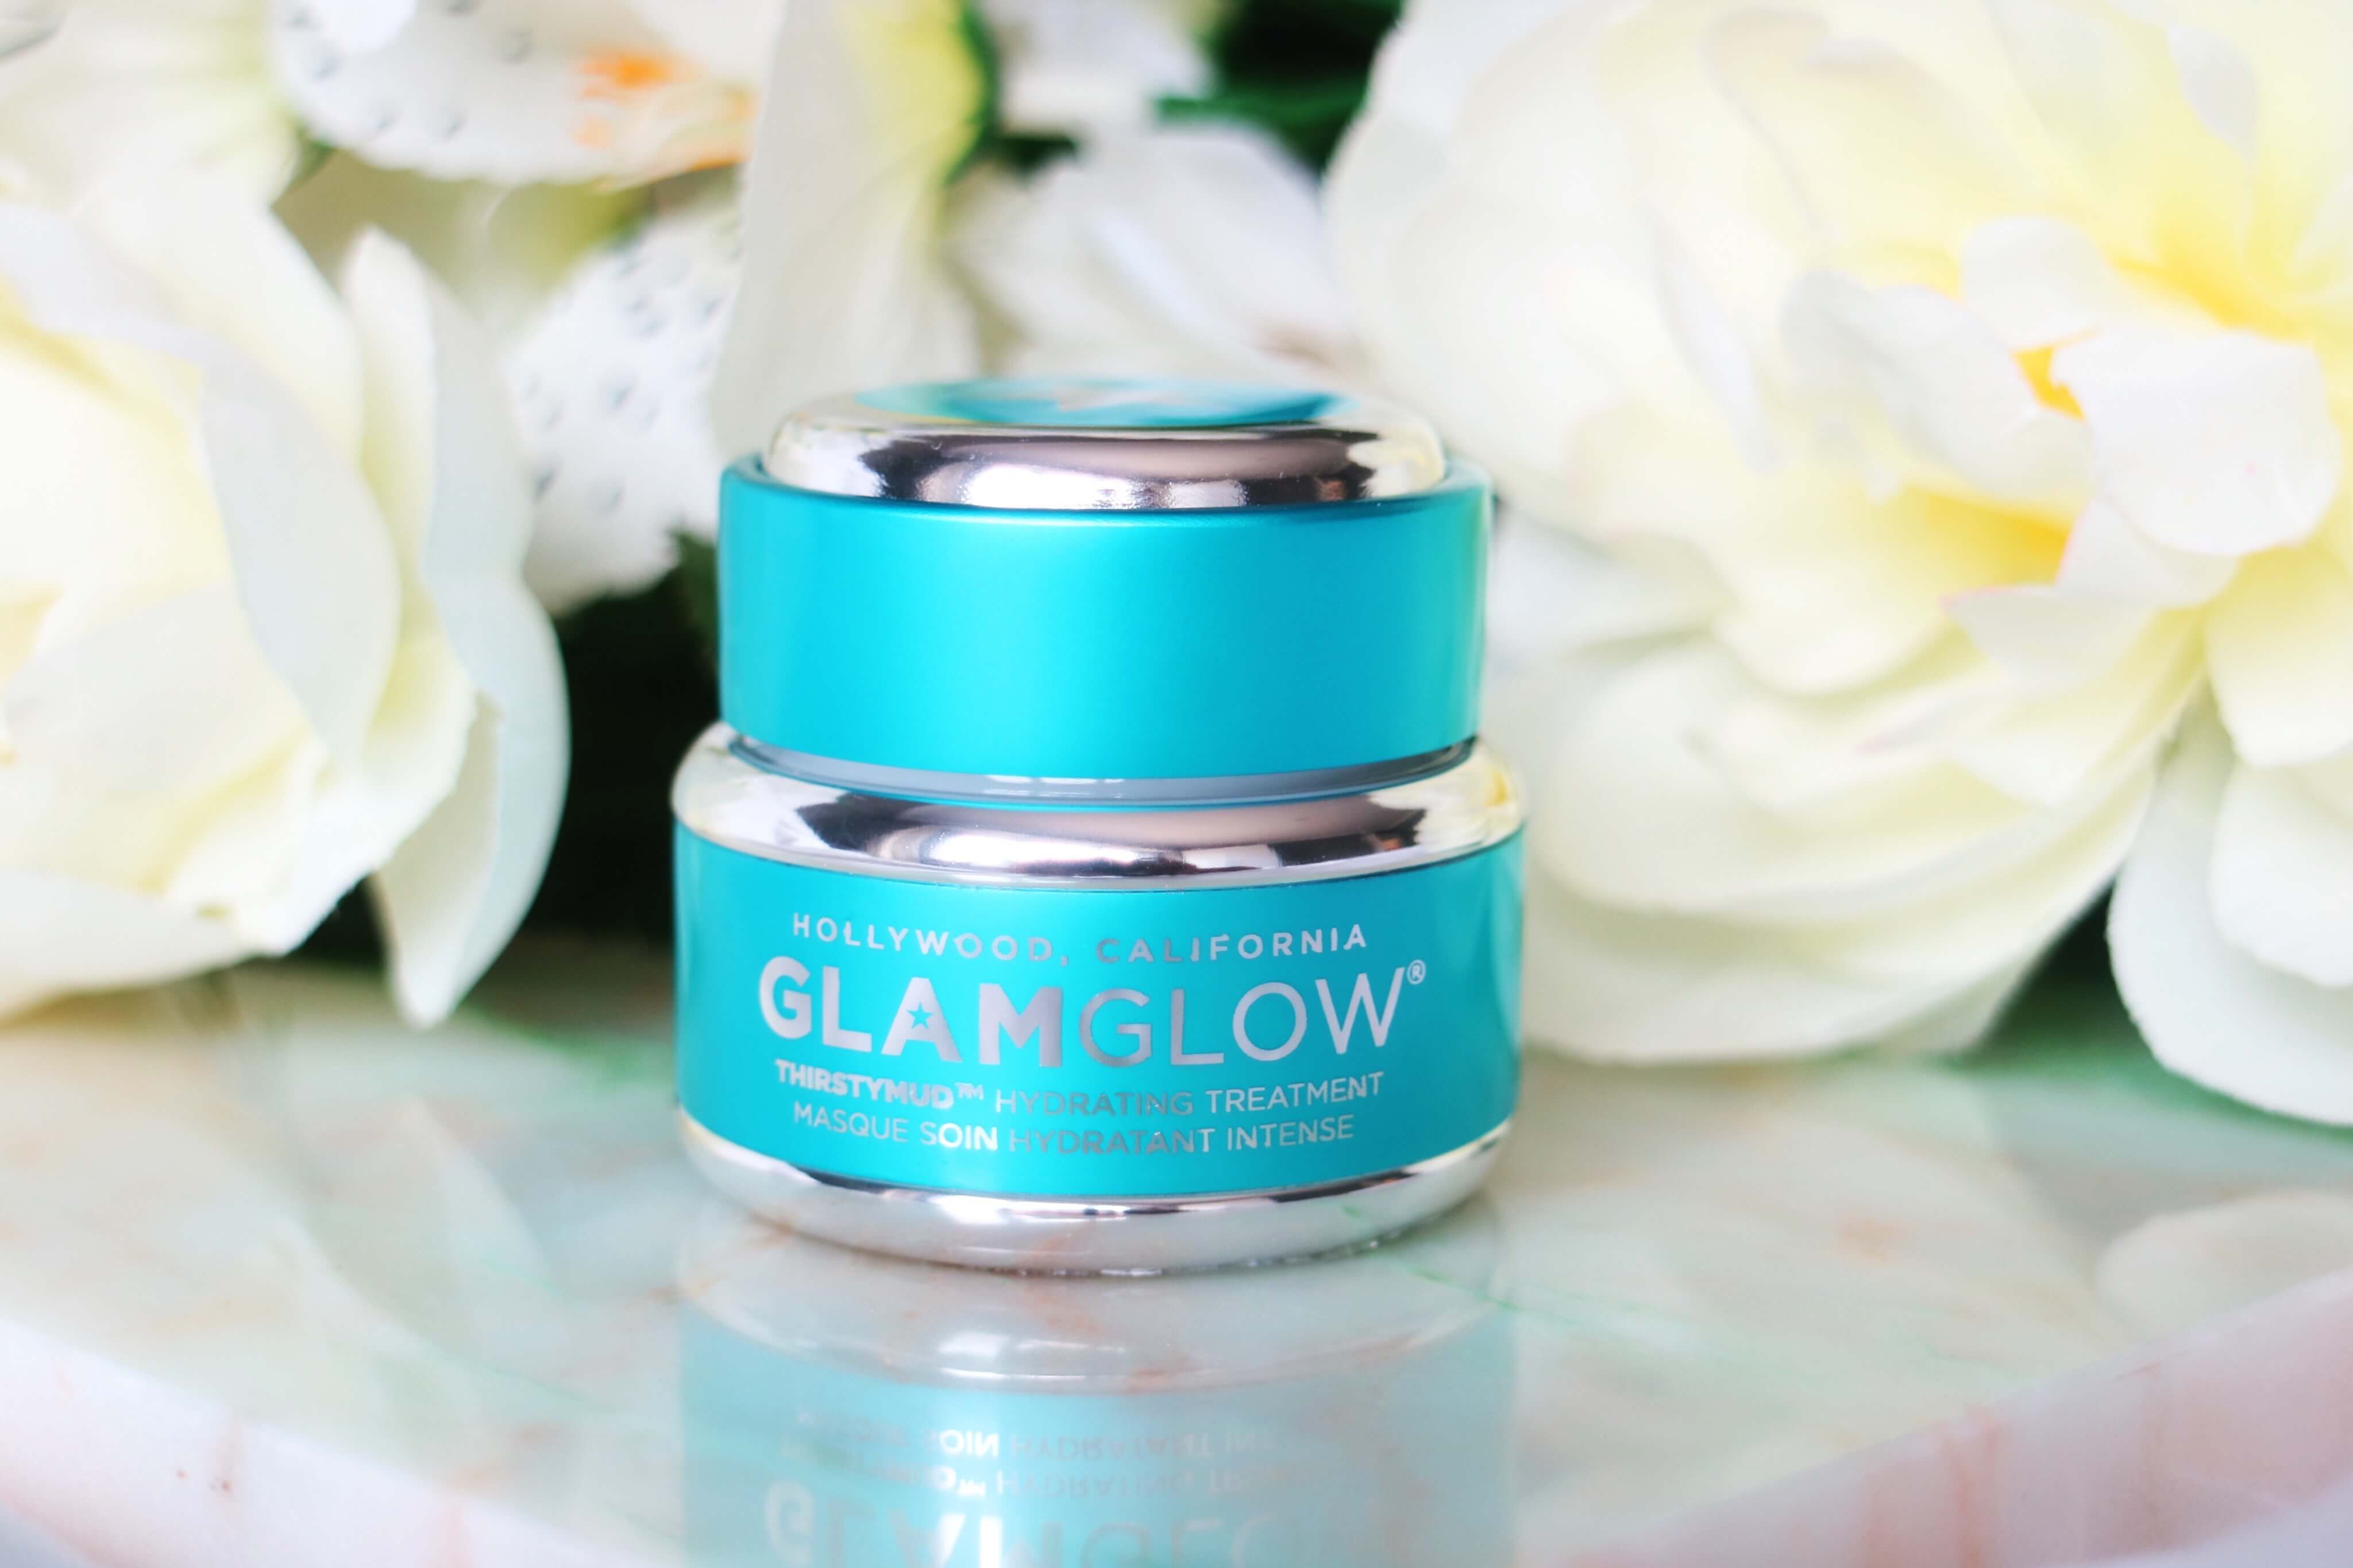 glamglow thirstymud hydrating treatment perfect for all skin types can provides youthful glowing bright skin